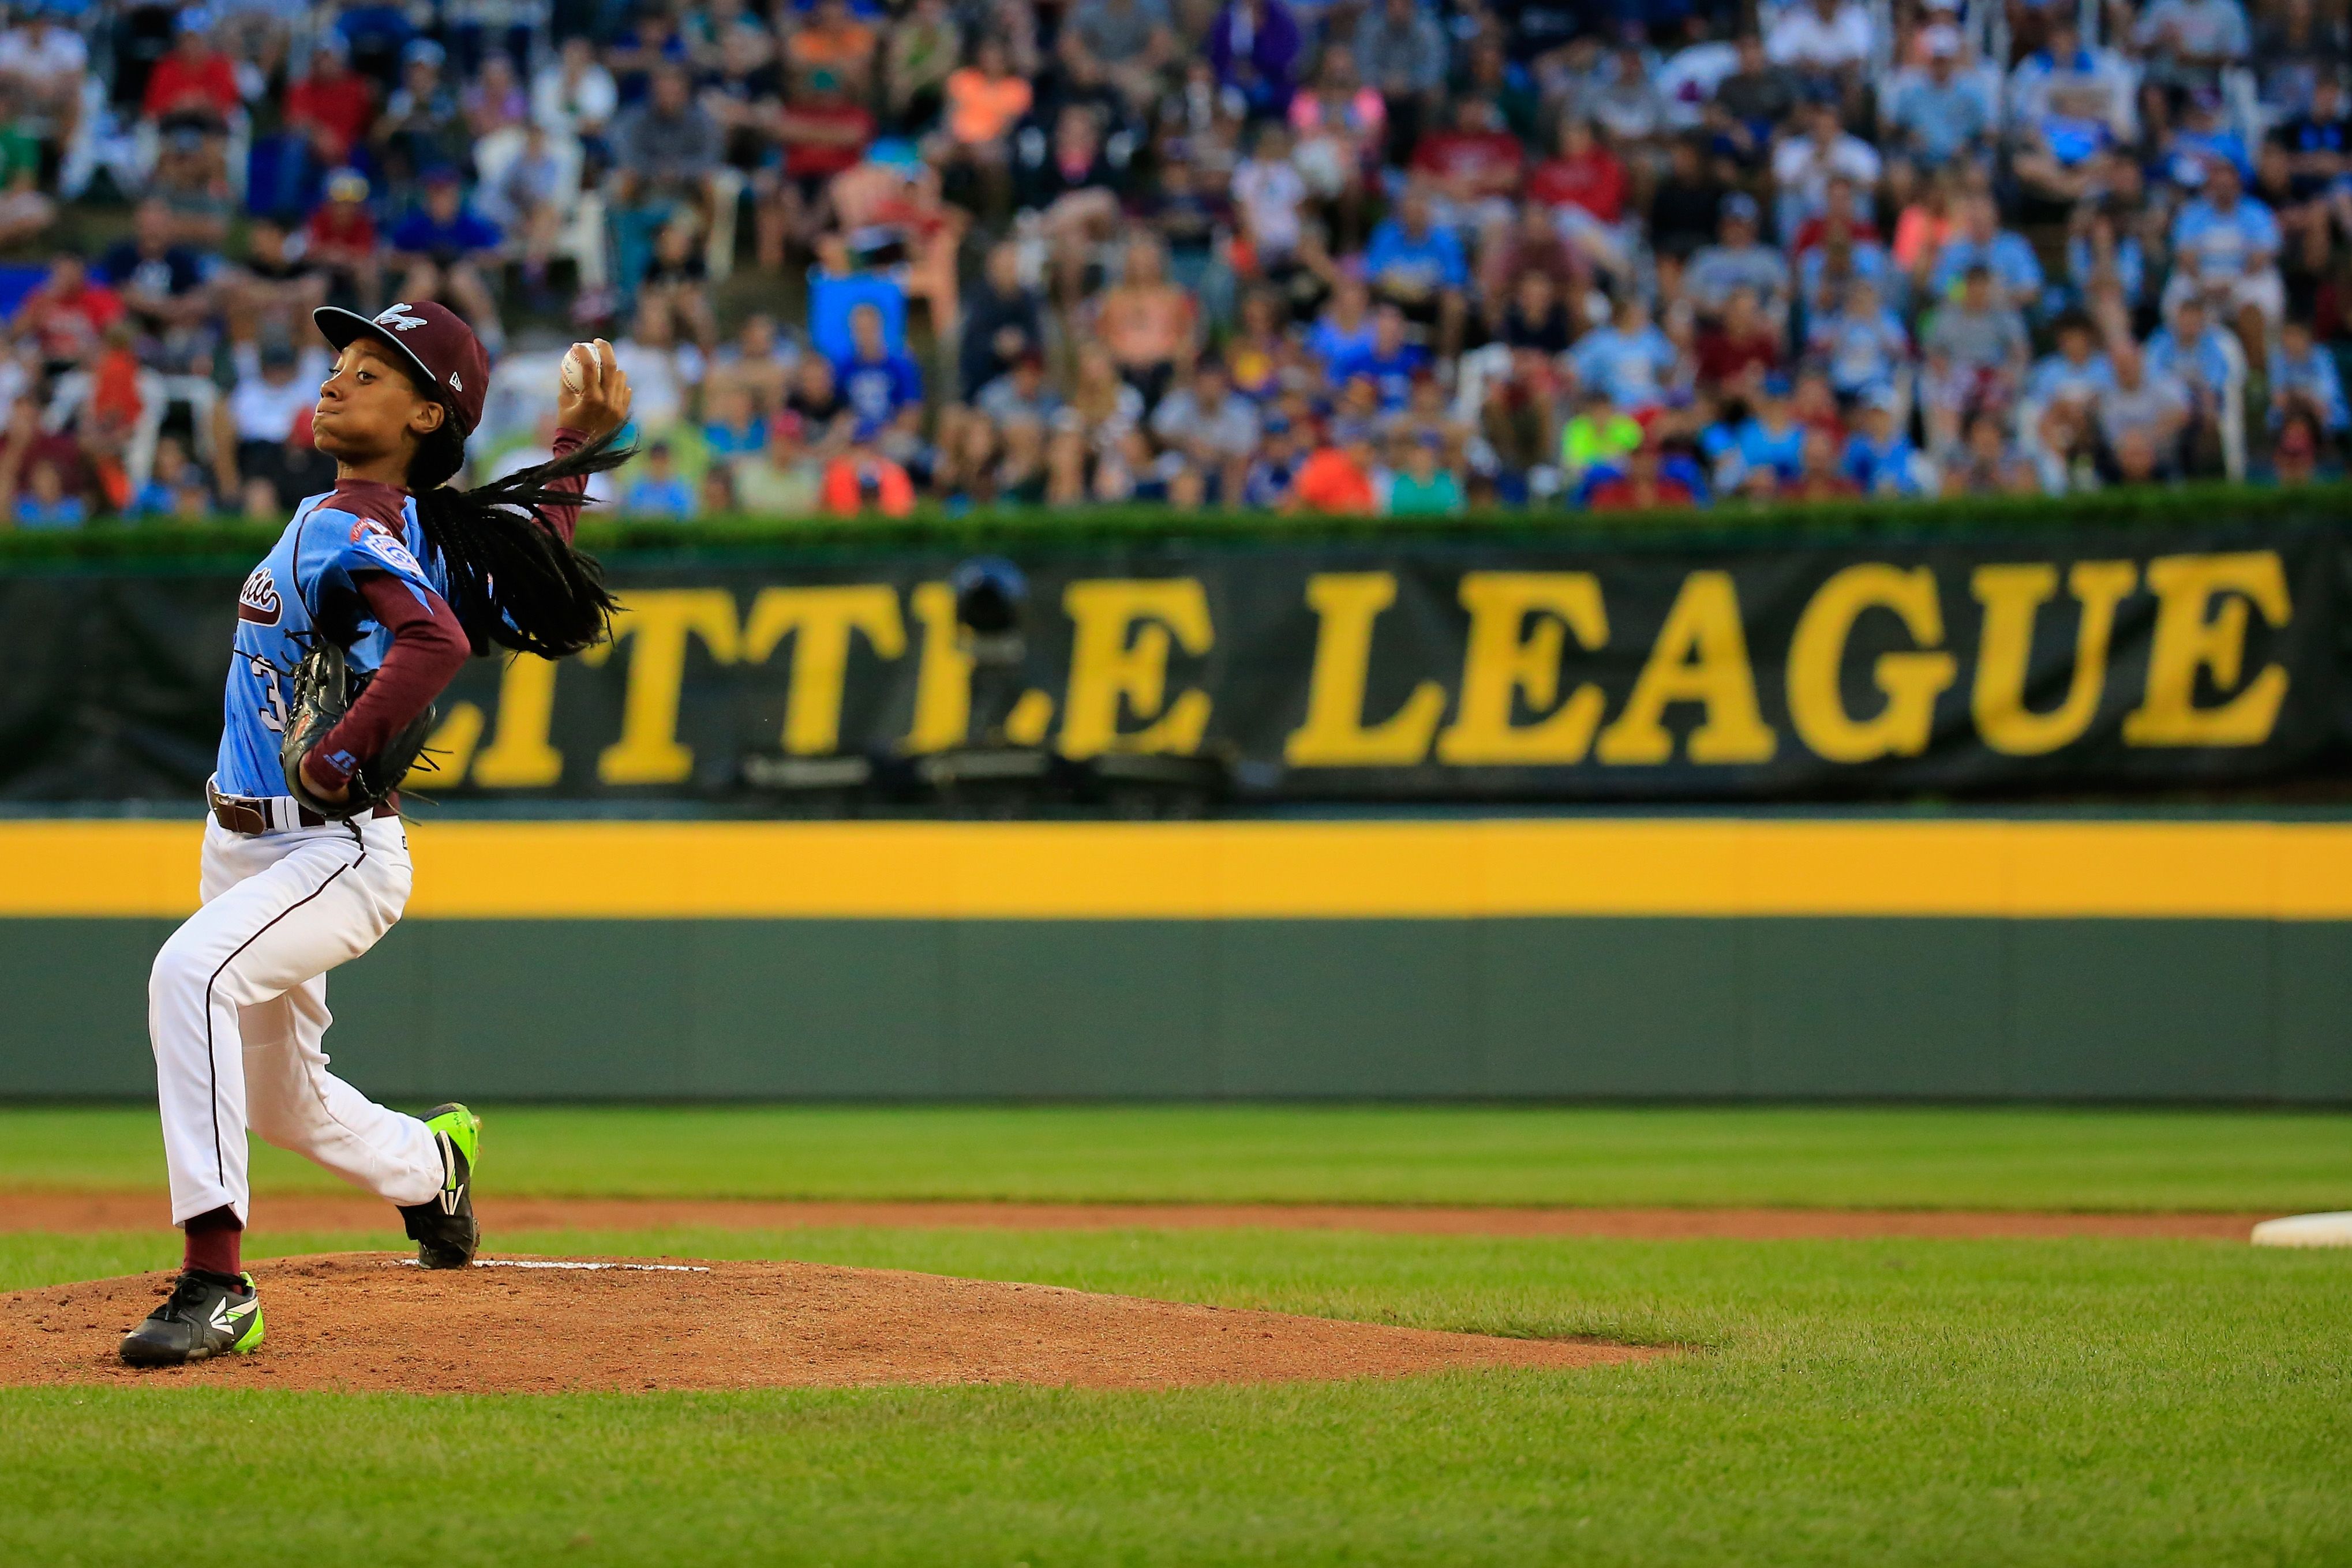 At 13, Mo'Ne Davis is ready for her moment in the spotlight